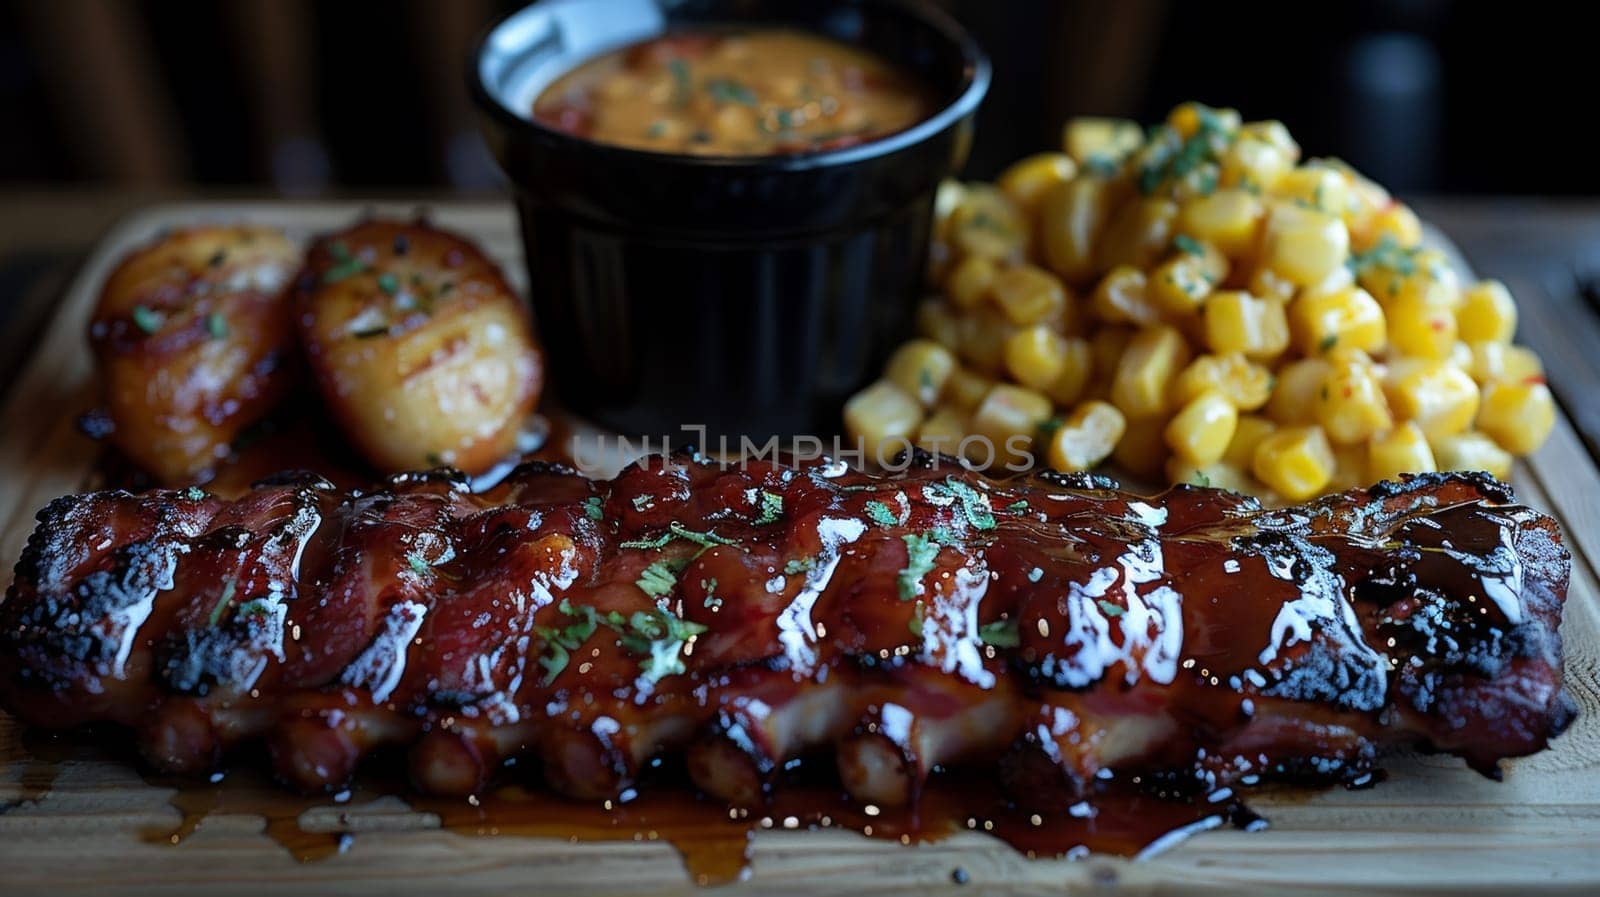 A close up of a plate with ribs, potatoes and sauce, AI by starush